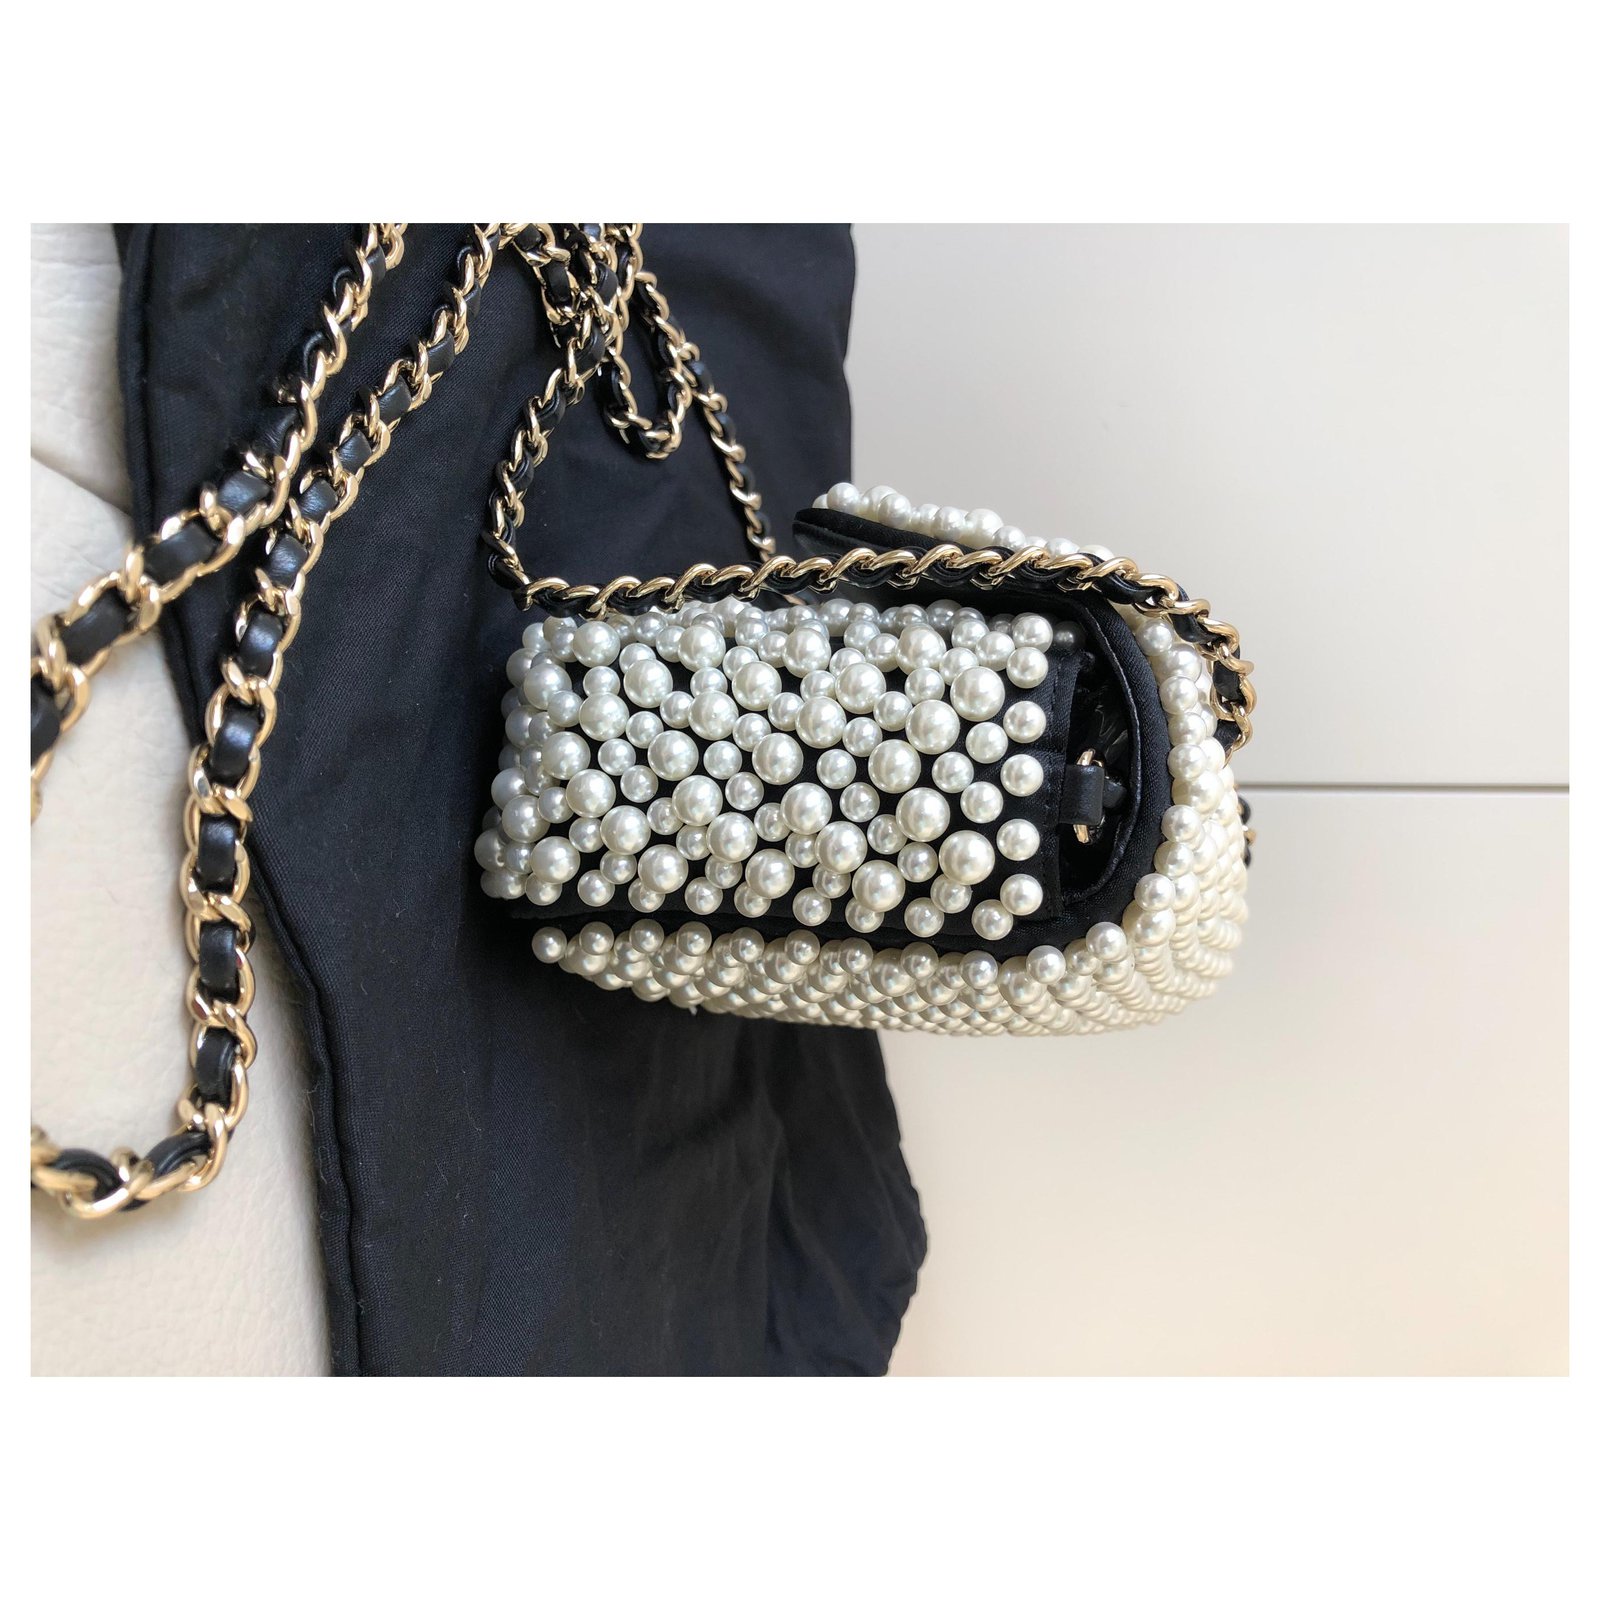 Pearl bag,limited